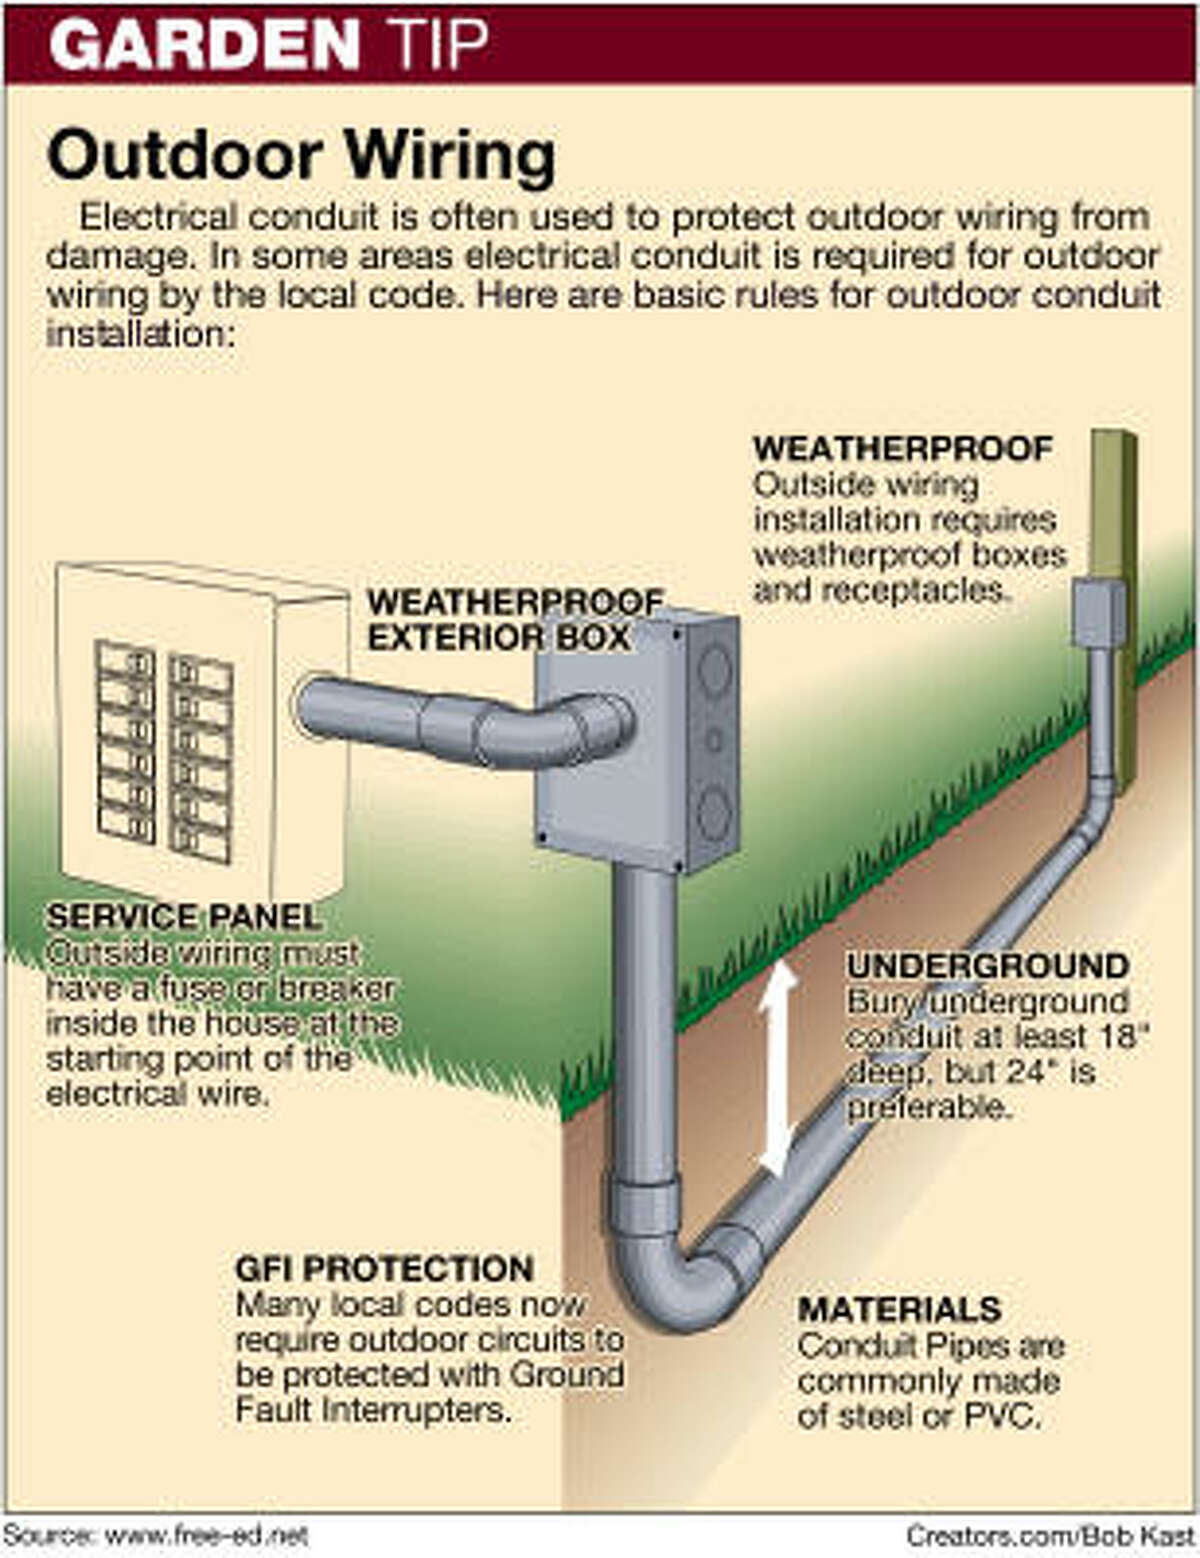 Basic Outdoor Wiring Comes With Safety Precautions